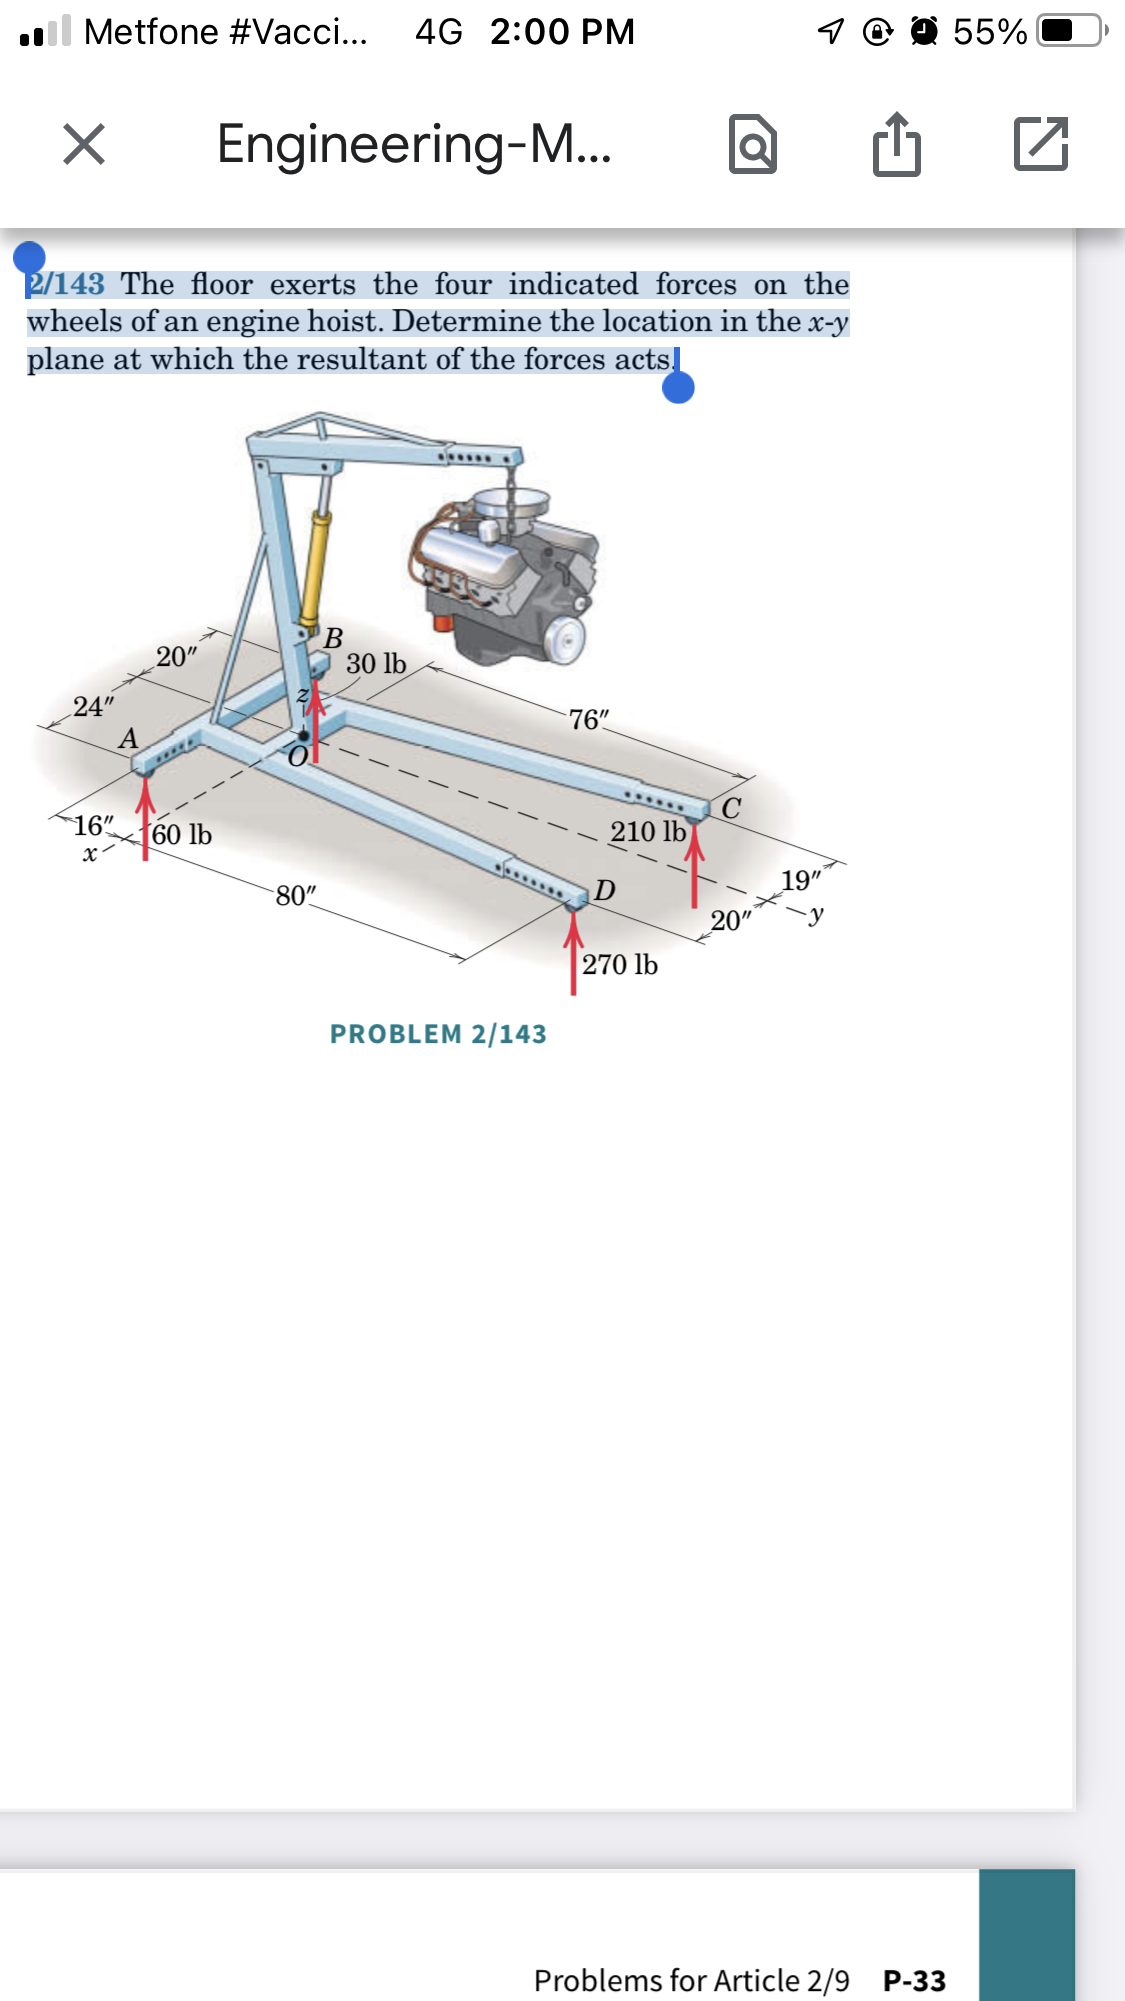 Il Metfone #Vacci... 4G 2:00 PM
X
Engineering-M... Q
2/143 The floor exerts the four indicated forces on the
wheels of an engine hoist. Determine the location in the x-y
plane at which the resultant of the forces acts.
******
B
20"
60 lb
24"
16"
x
80"
30 lb
PROBLEM 2/143
76"
******
210 lb
D
270 lb
20"
19"
y
Problems for Article 2/9 P-33
55%